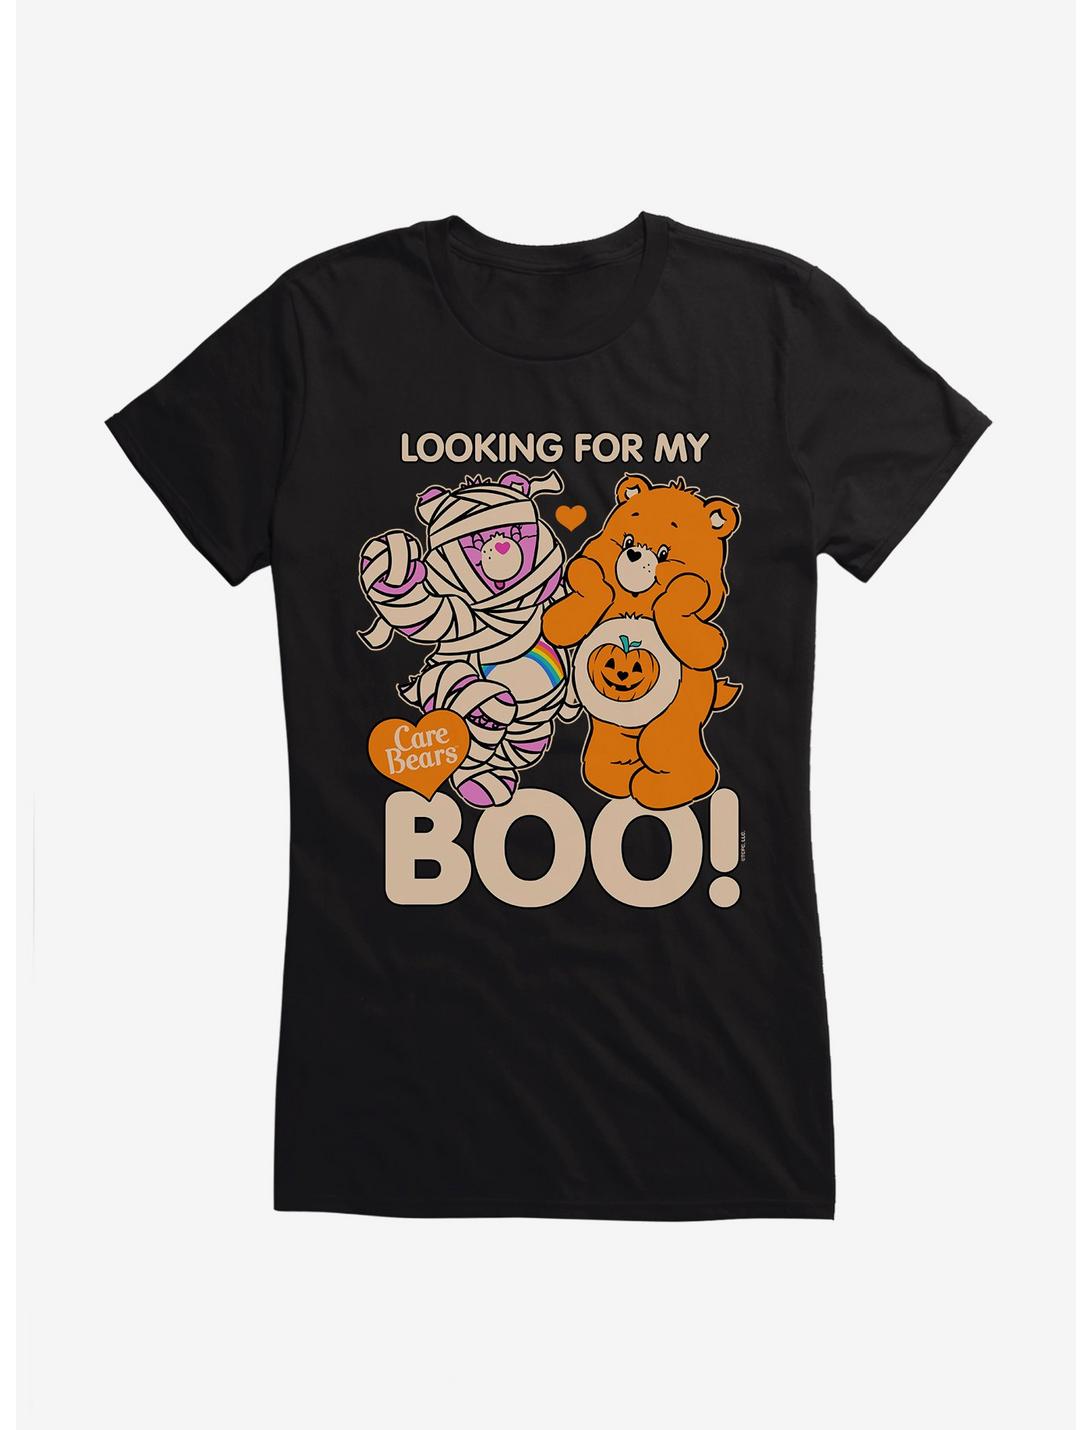 Care Bears Looking For My Boo Girls T-Shirt, BLACK, hi-res